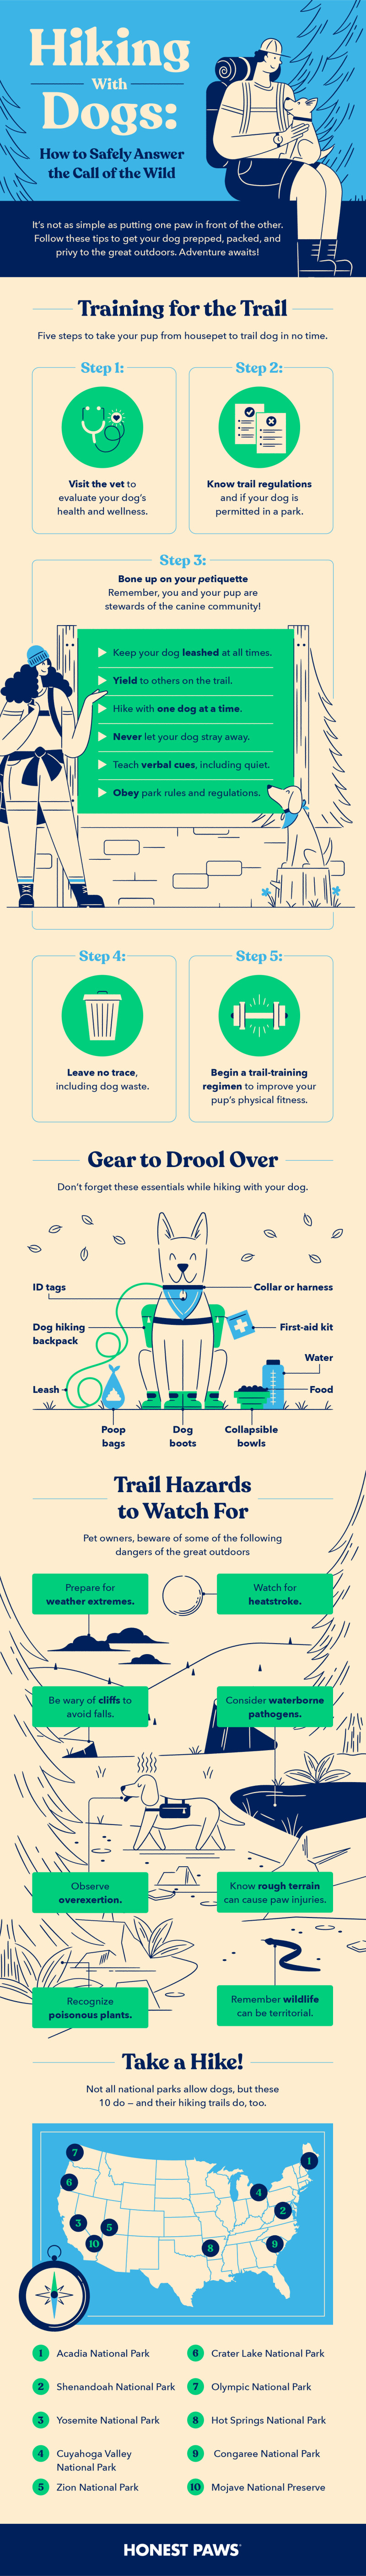 an infographic overviewing Honest Paws’ ultimate guide to hiking with dogs, including tips to prepare for the trail, dog hiking gear, trail hazards, and 50 dog-friendly national parks to visit.